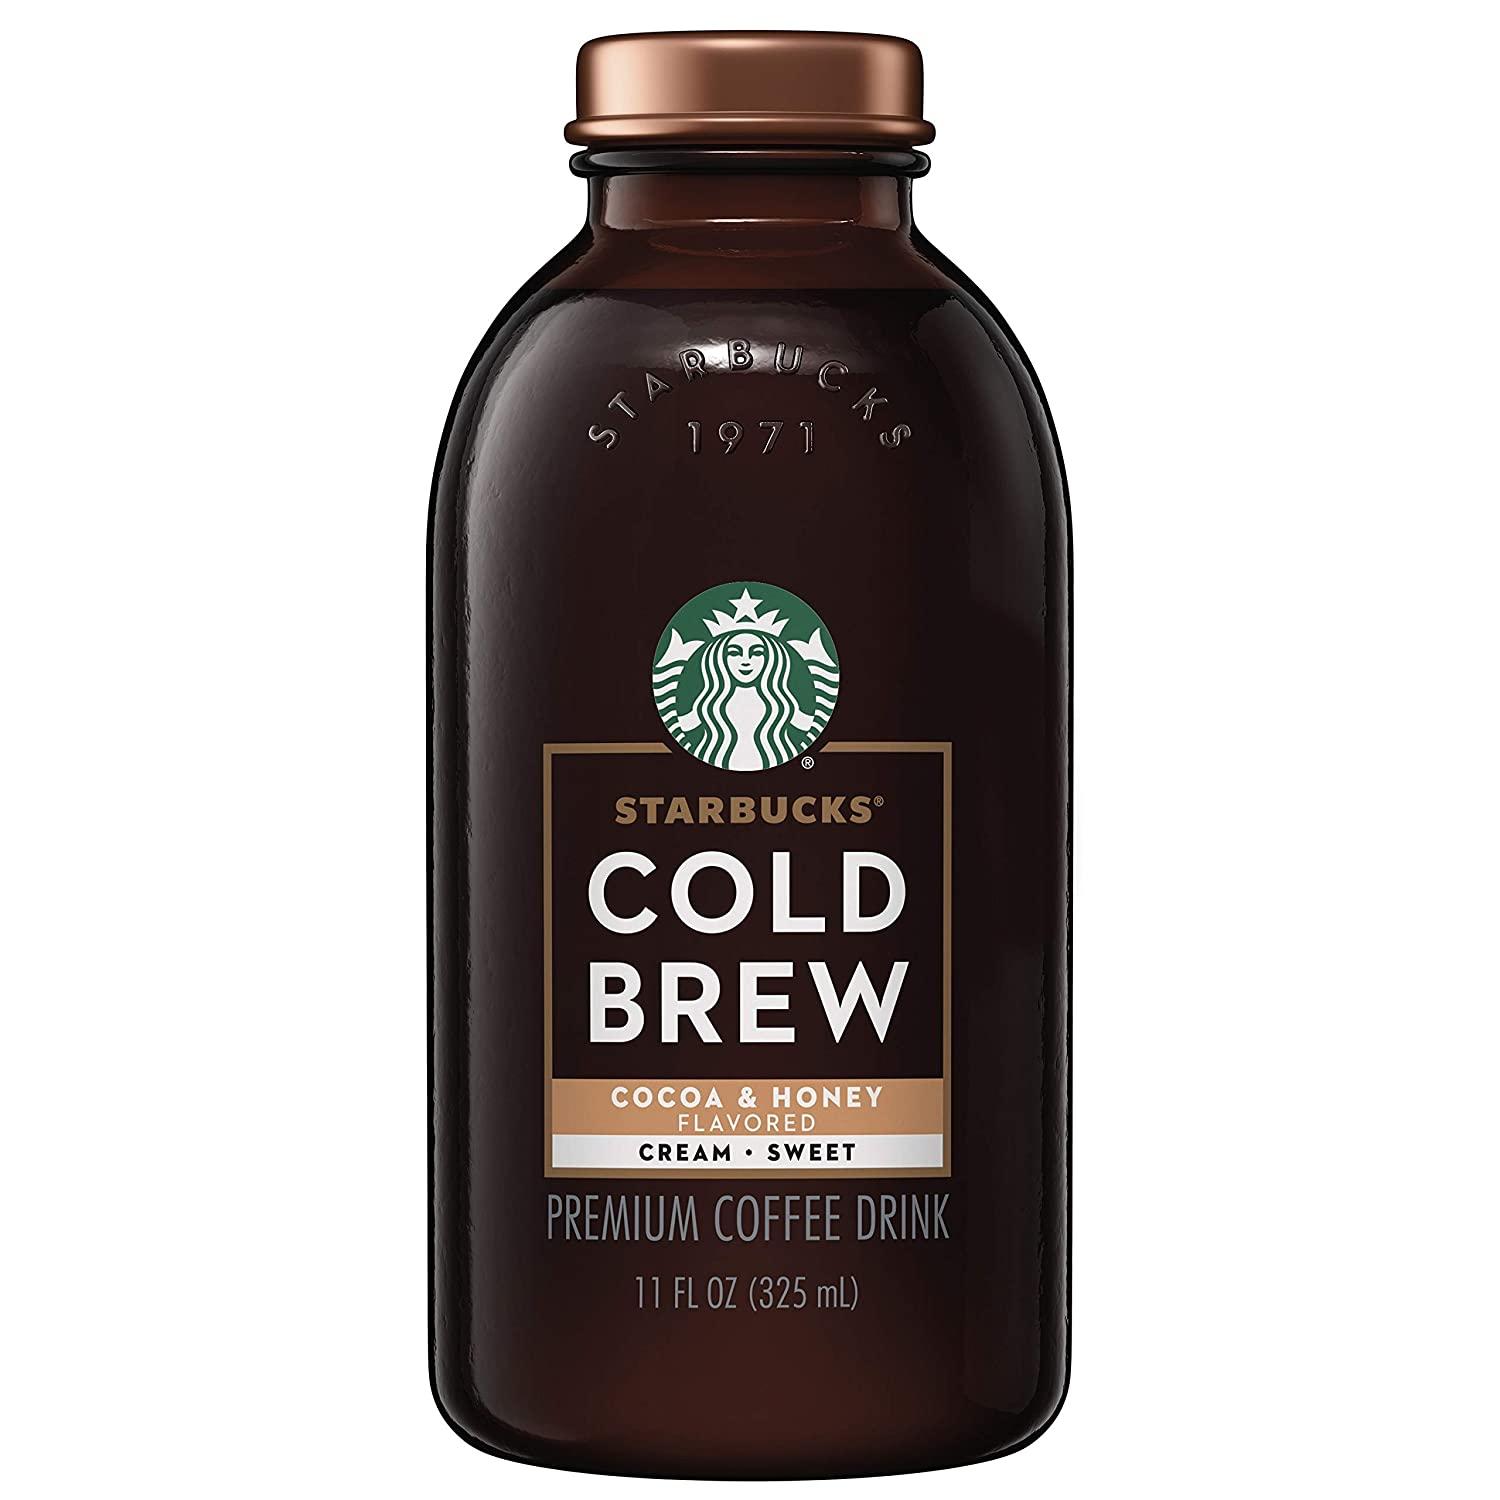 24 Starbucks Cold Brew Coffee for $18.71 Shipped